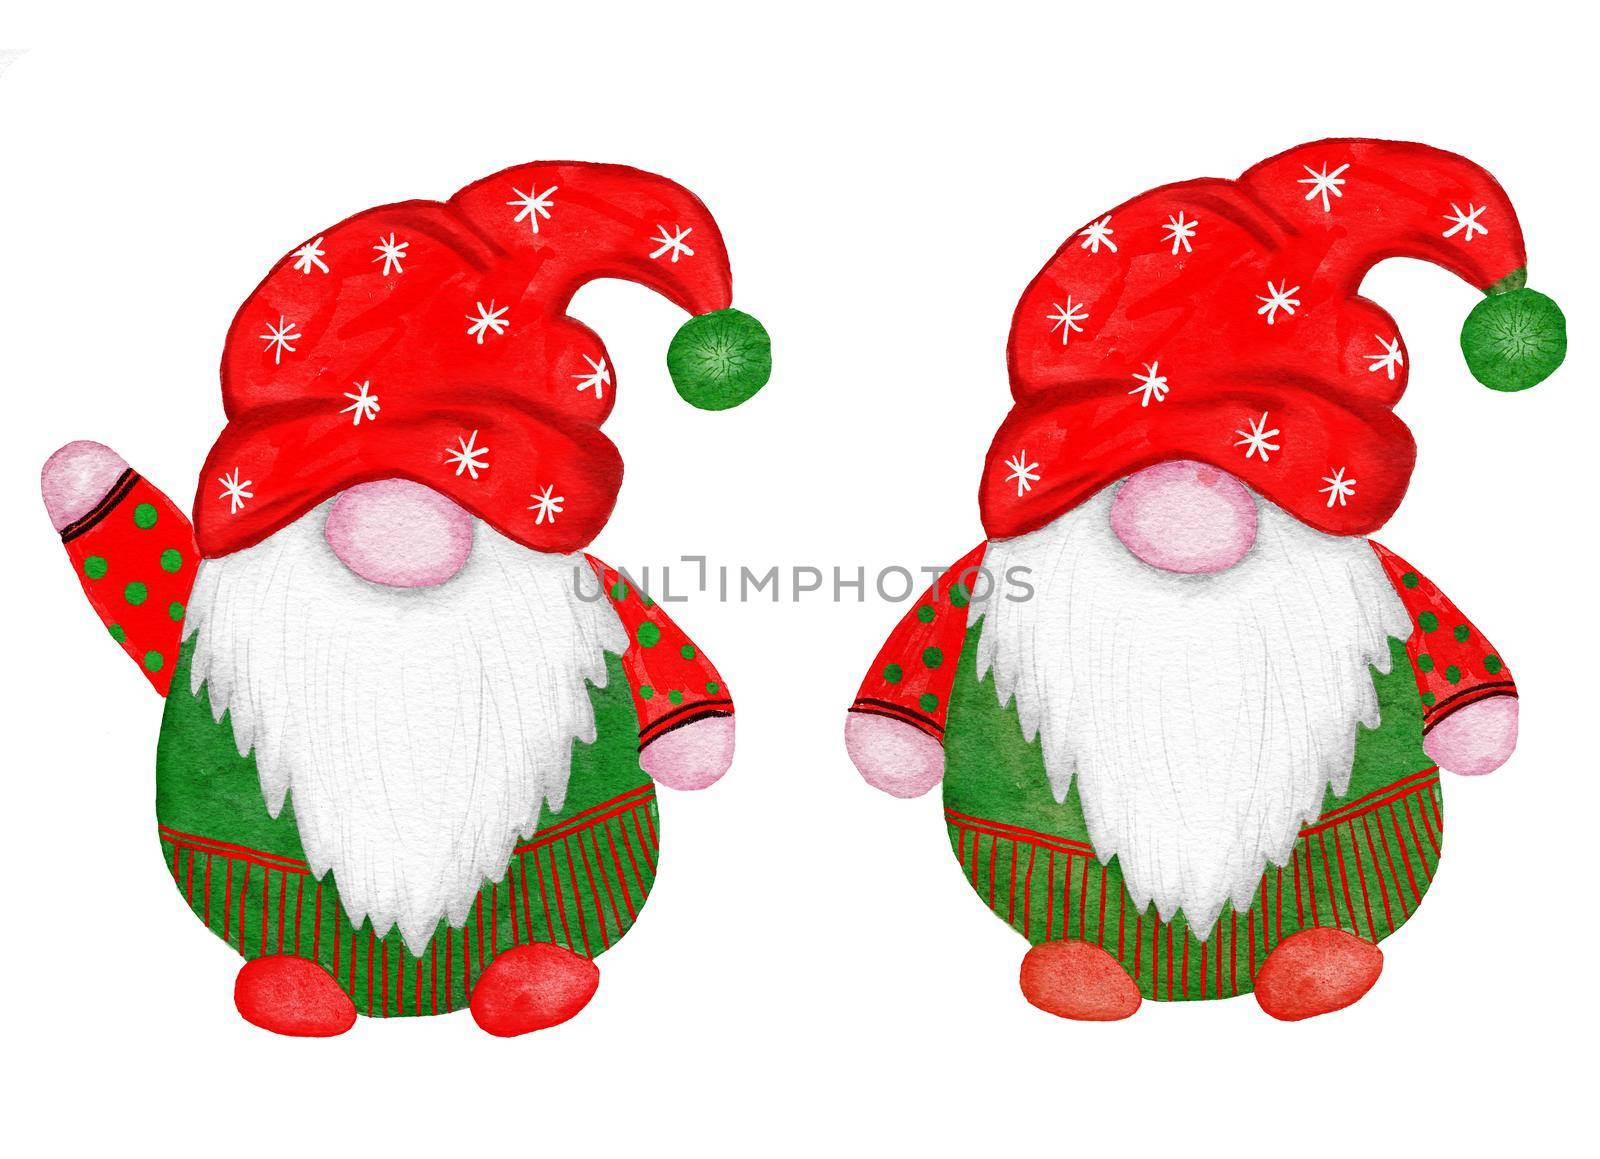 Watercolor hand drawn nordic scandinavian gnomes for christmas decor tree. New year illustration in green red cartoon style. Funny winter character north swedish elf in hat beard. Greeting card fabric